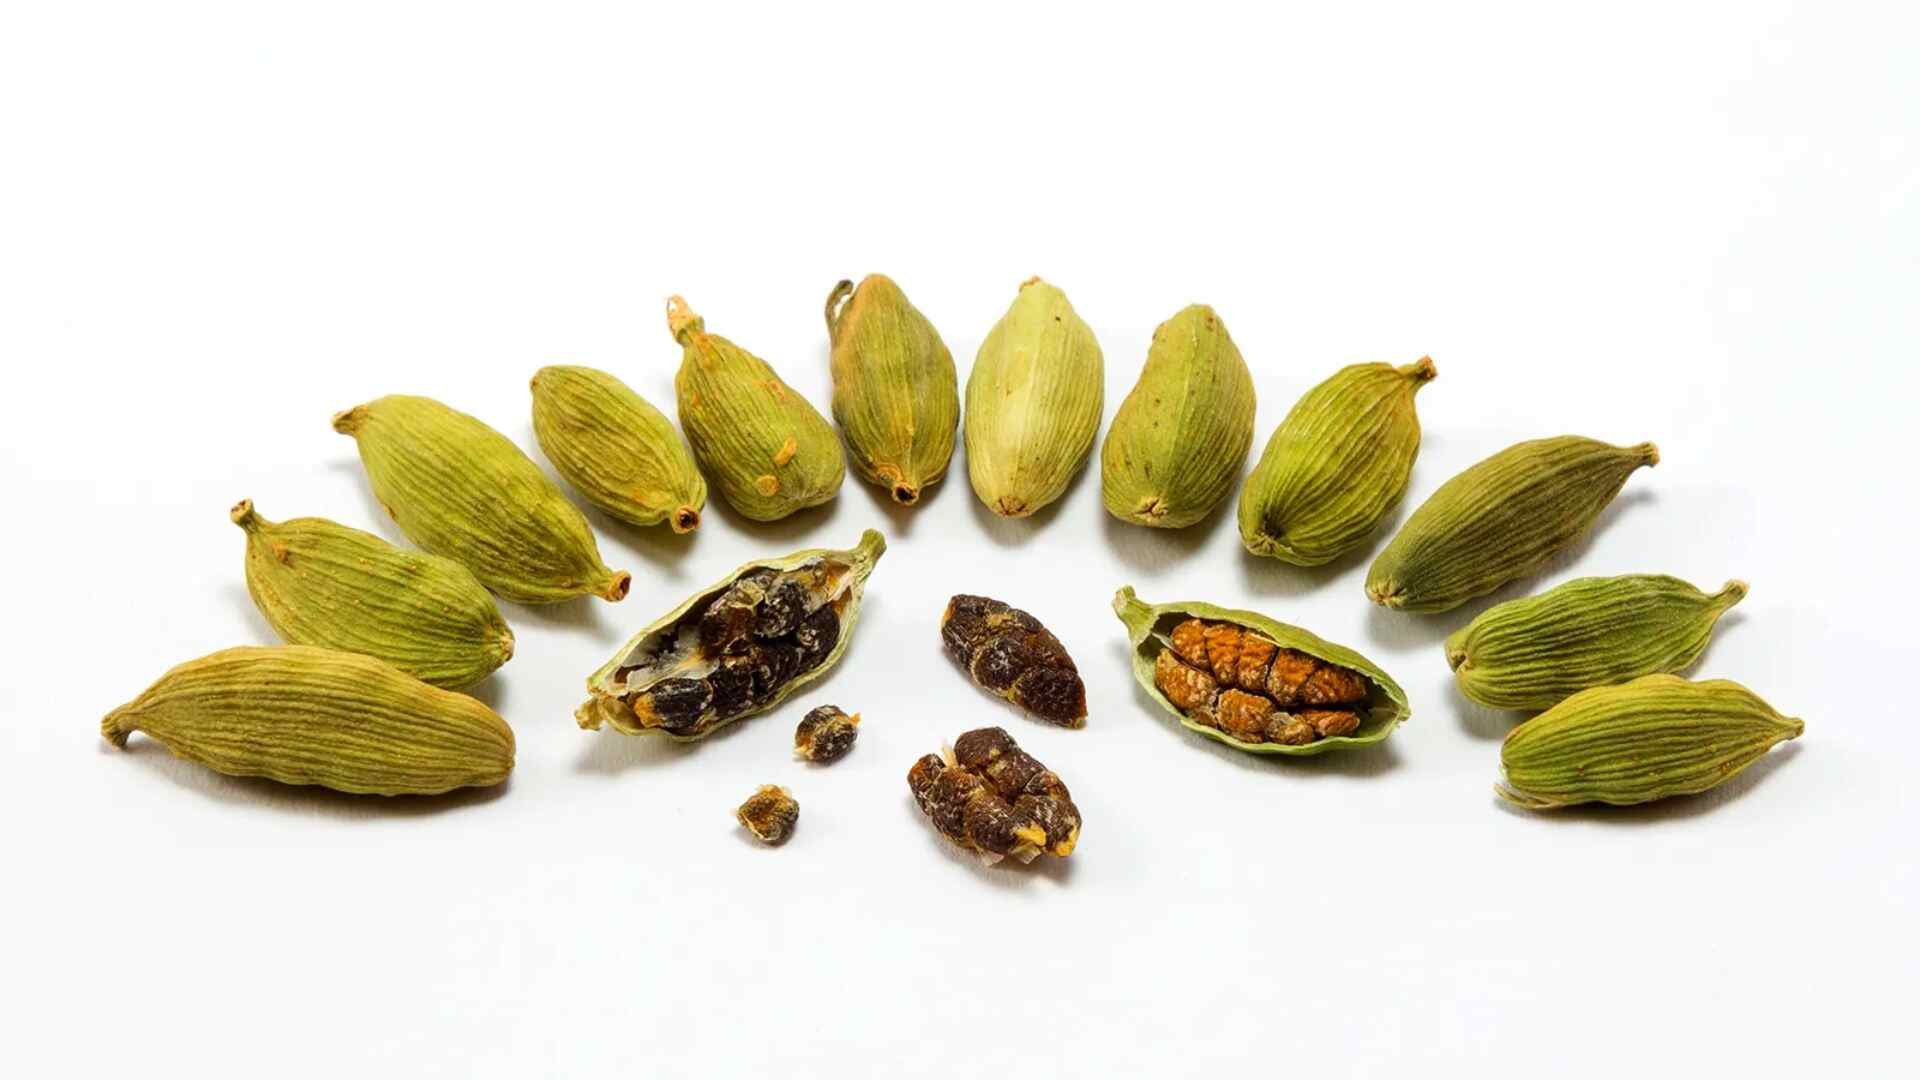 From Blood Pressure To Cancer Prevention: The Many Health Benefits Of Cardamom